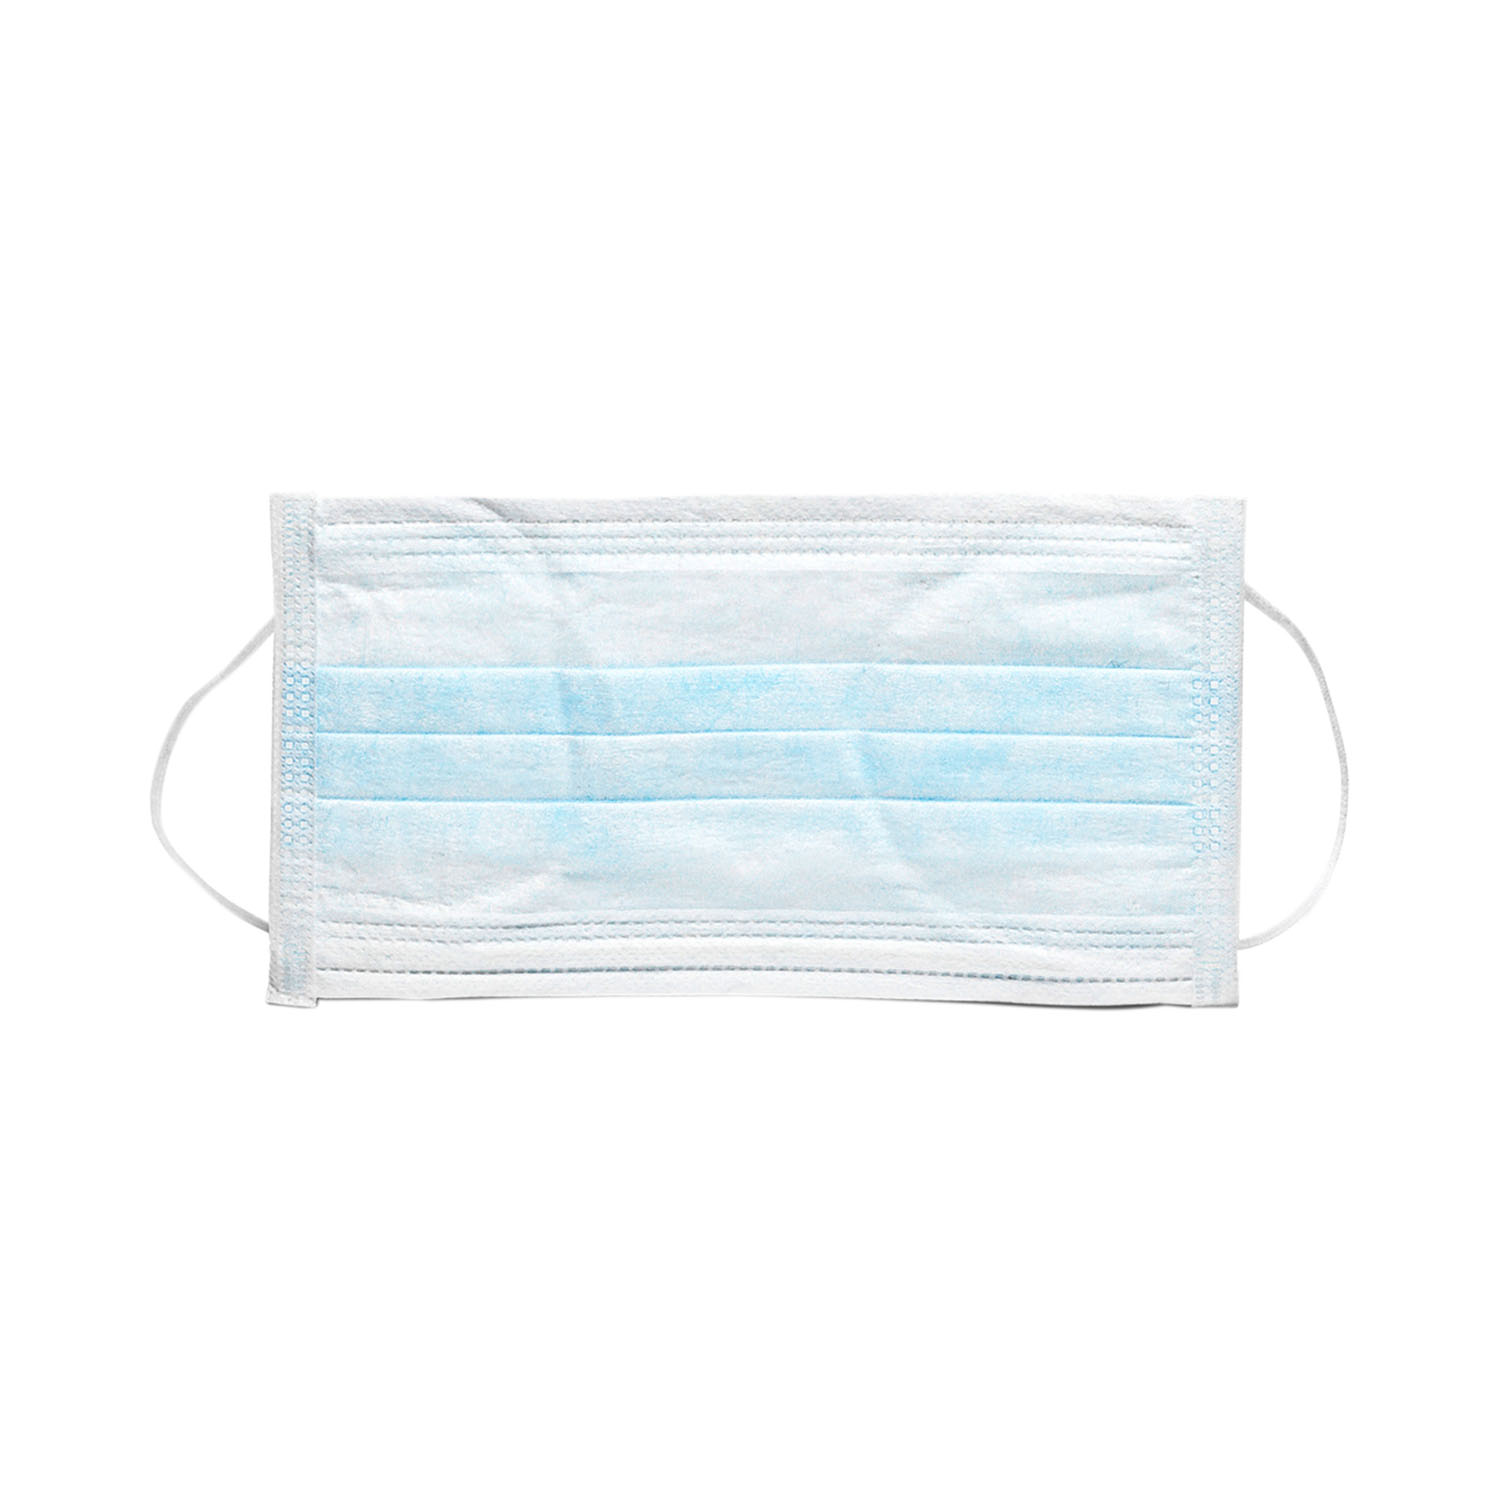 DUKAL SURGICAL FACE MASKS : 1541 BX        $37.15 Stocked